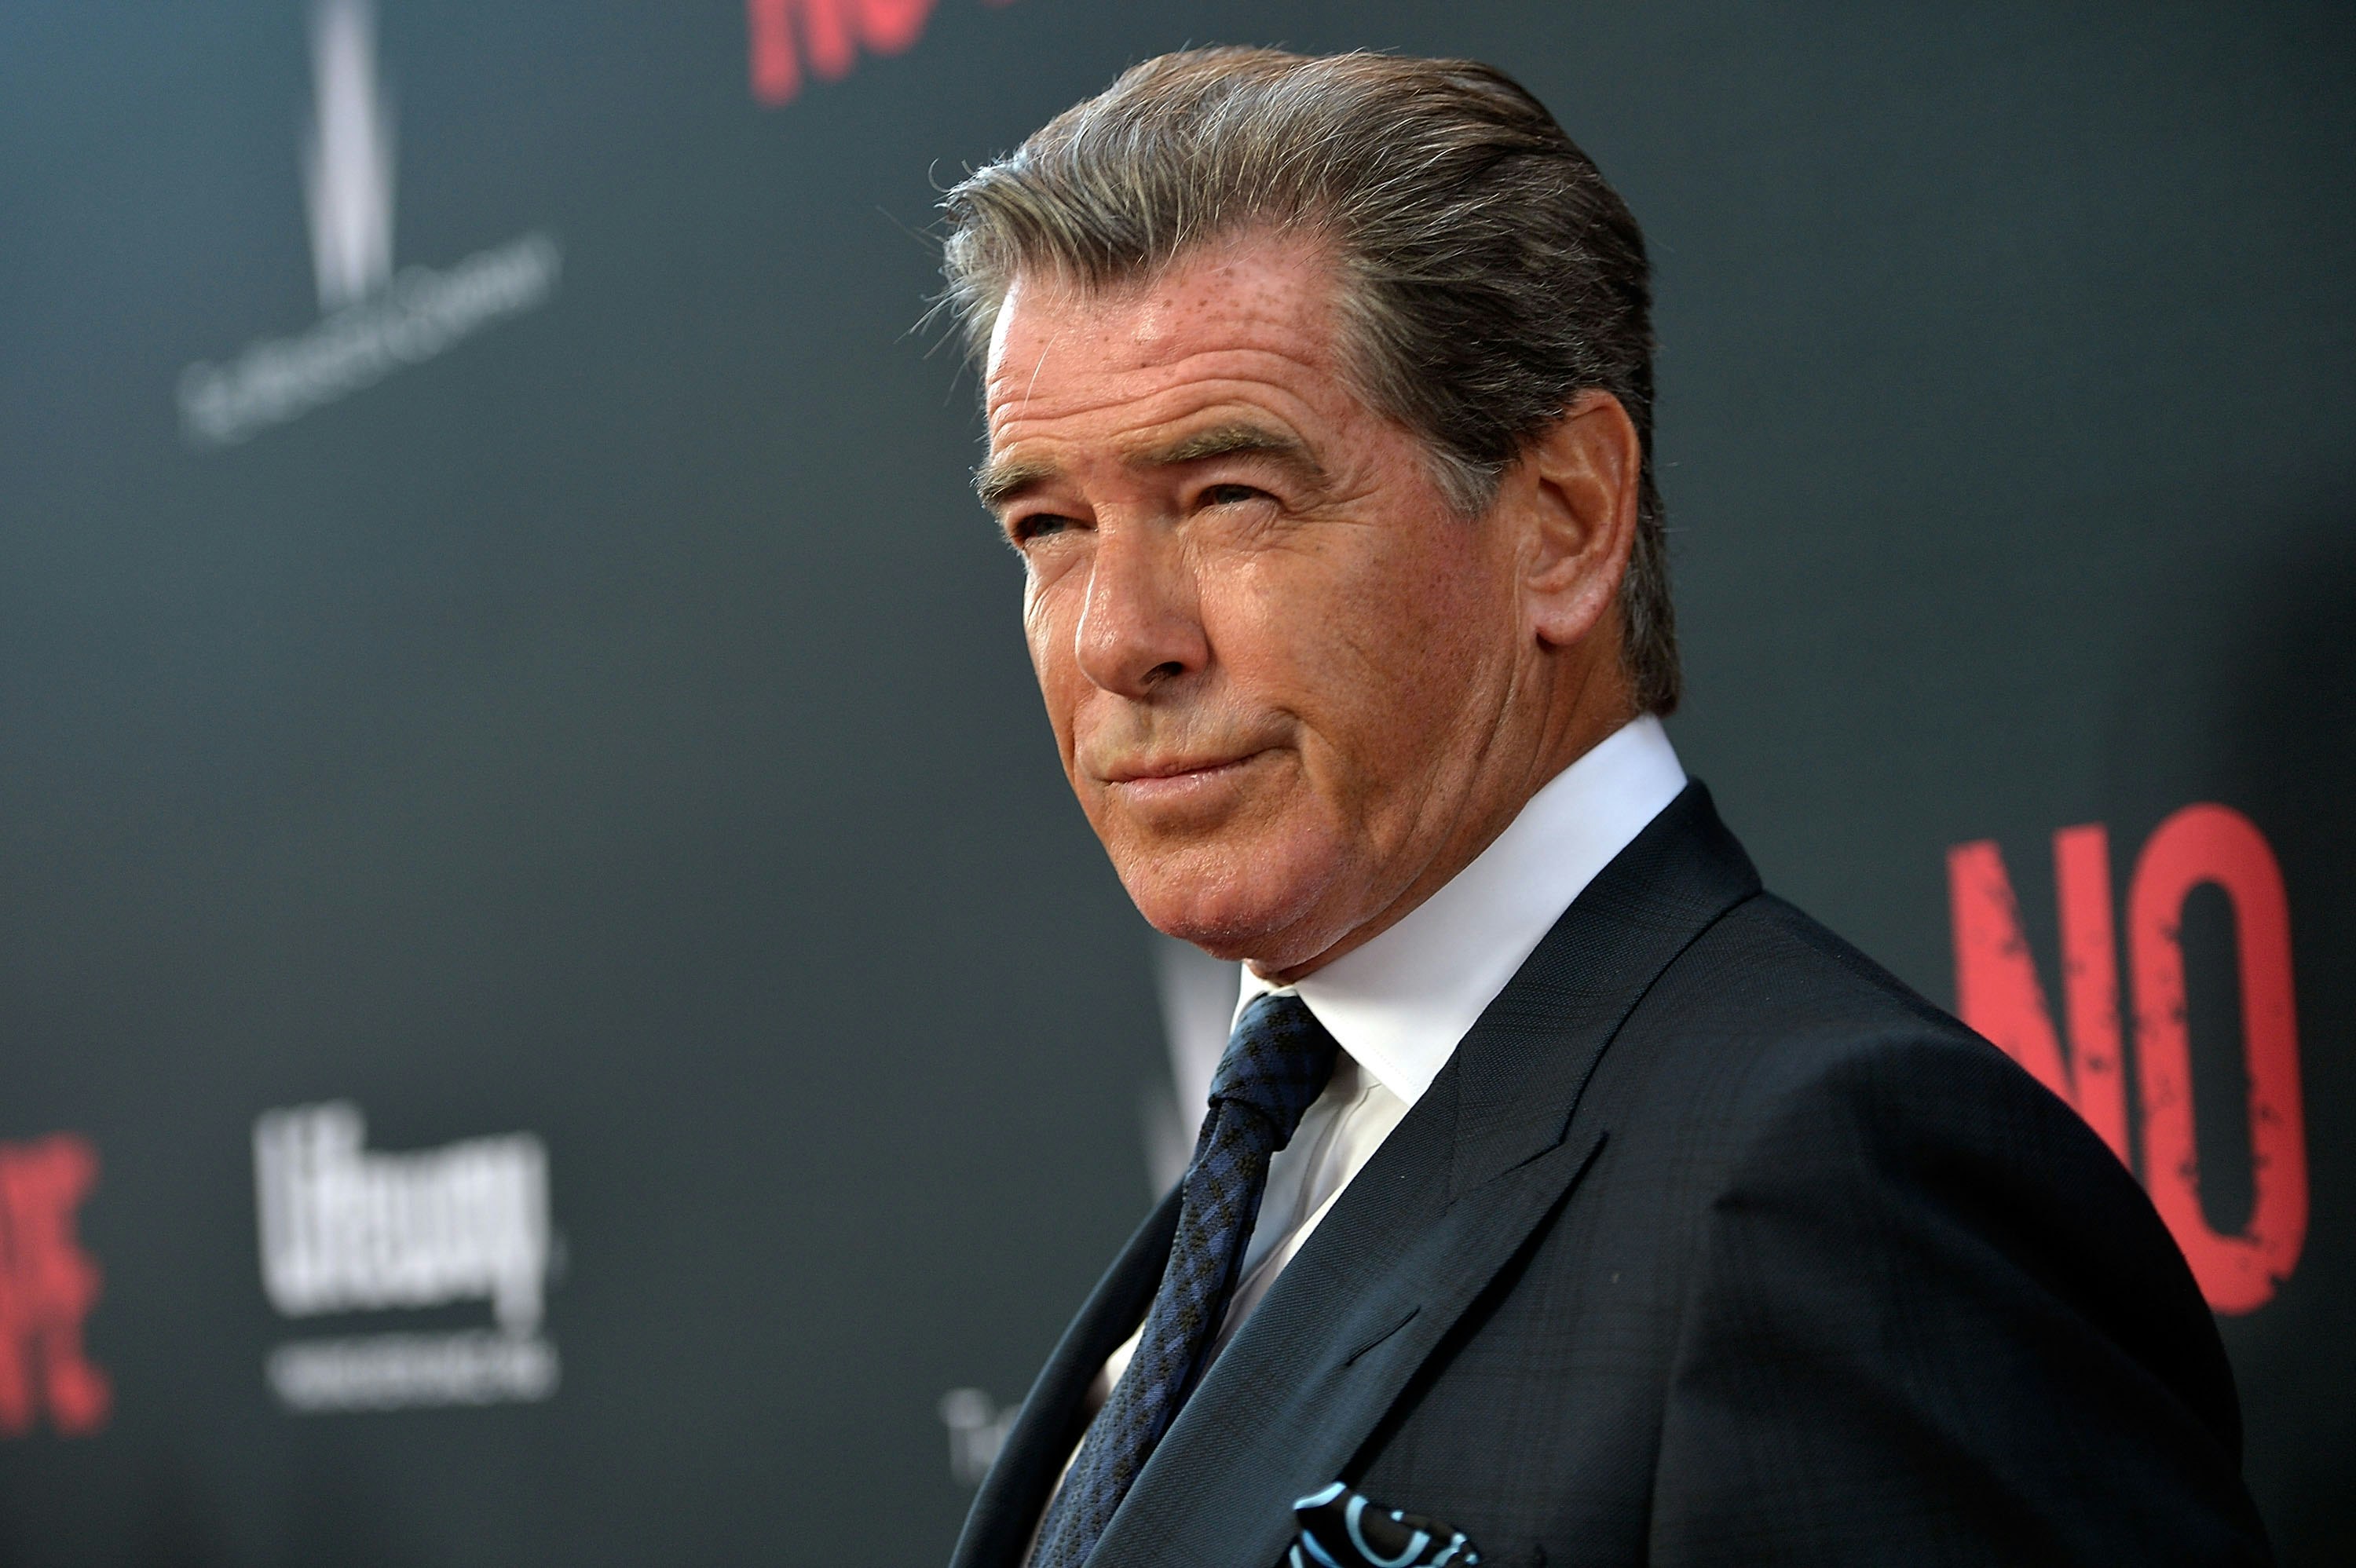 Pierce Brosnan Wants to Talks About 'the Foreigner,' Not James Bond